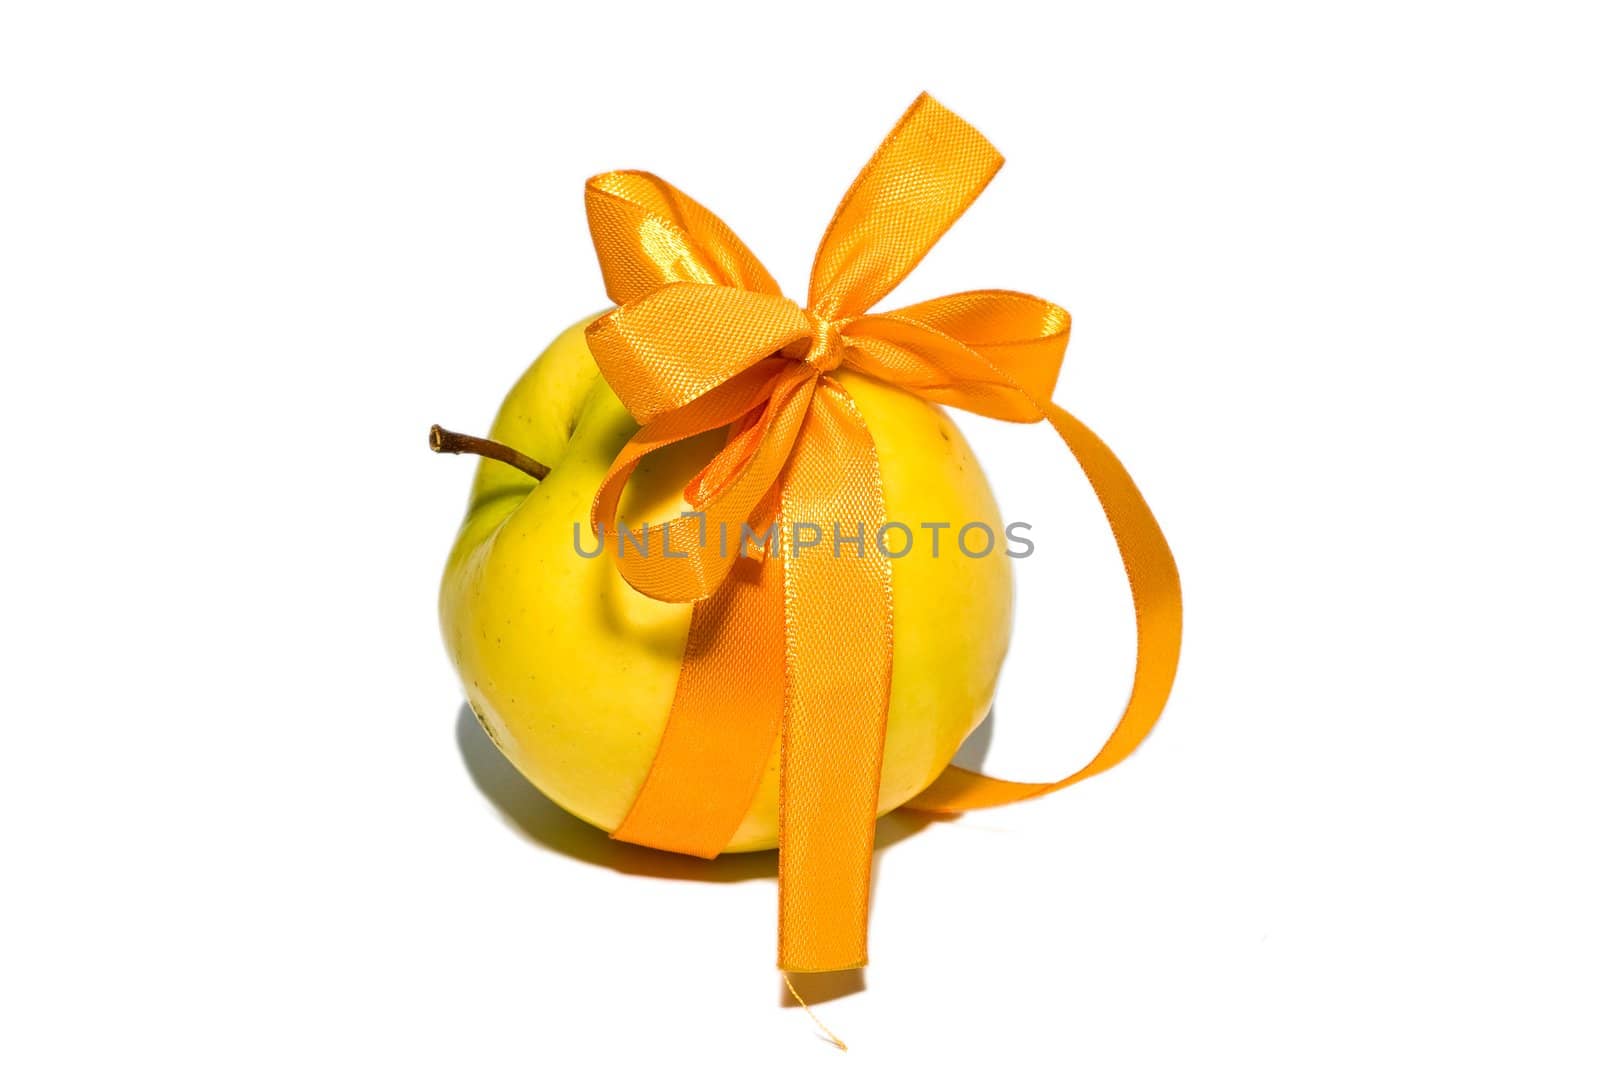 yellow apple with a gift bow on a white background